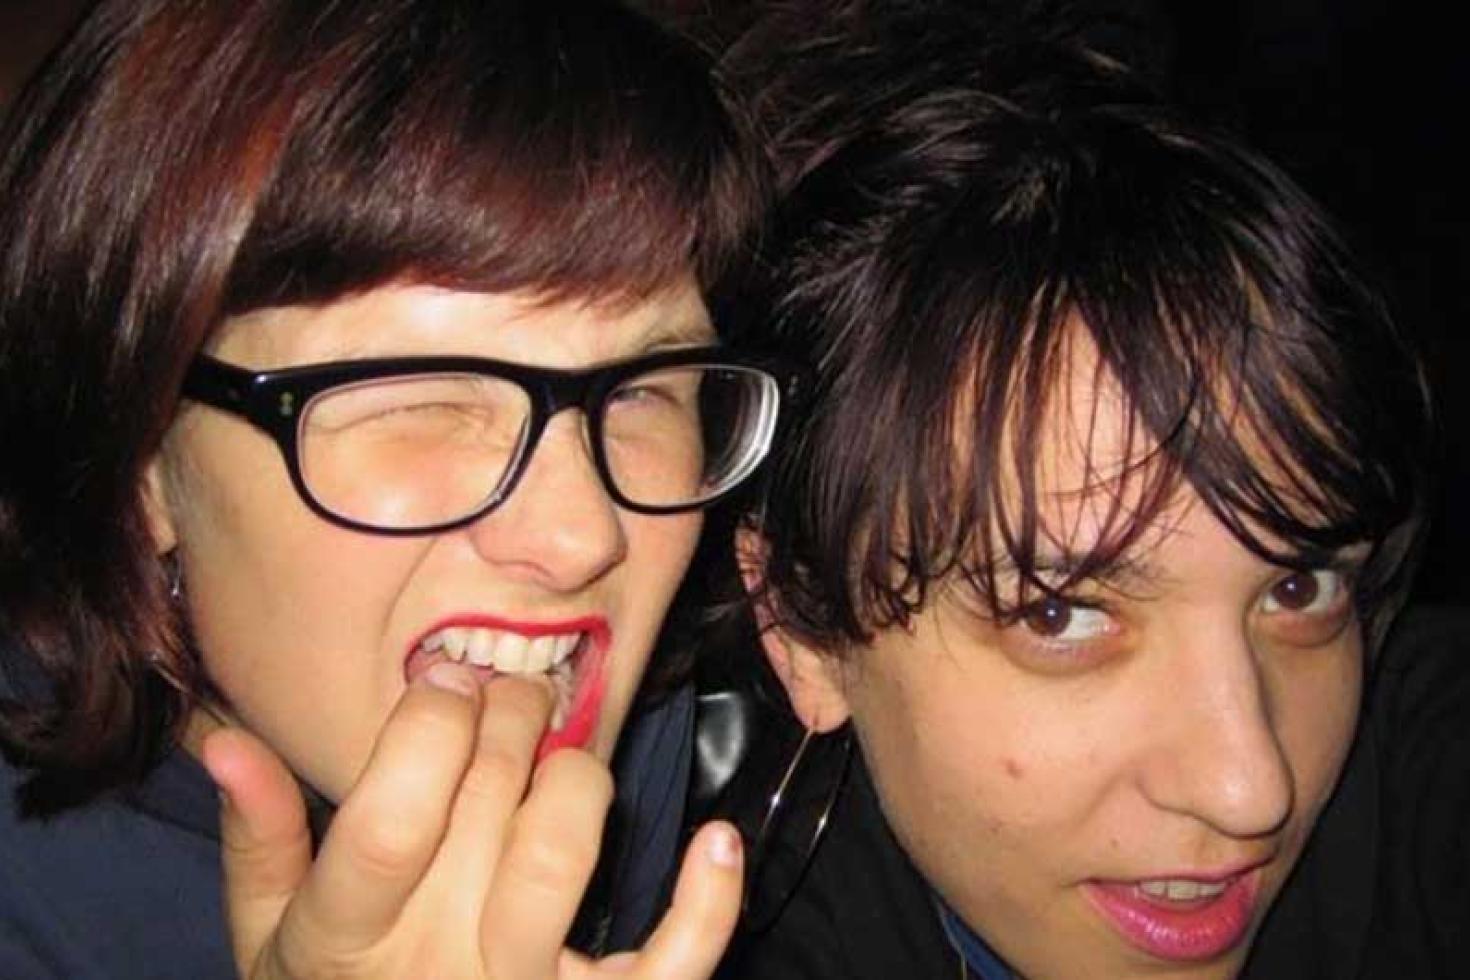 Bratmobile announce First Public Performance in Over 20 Years